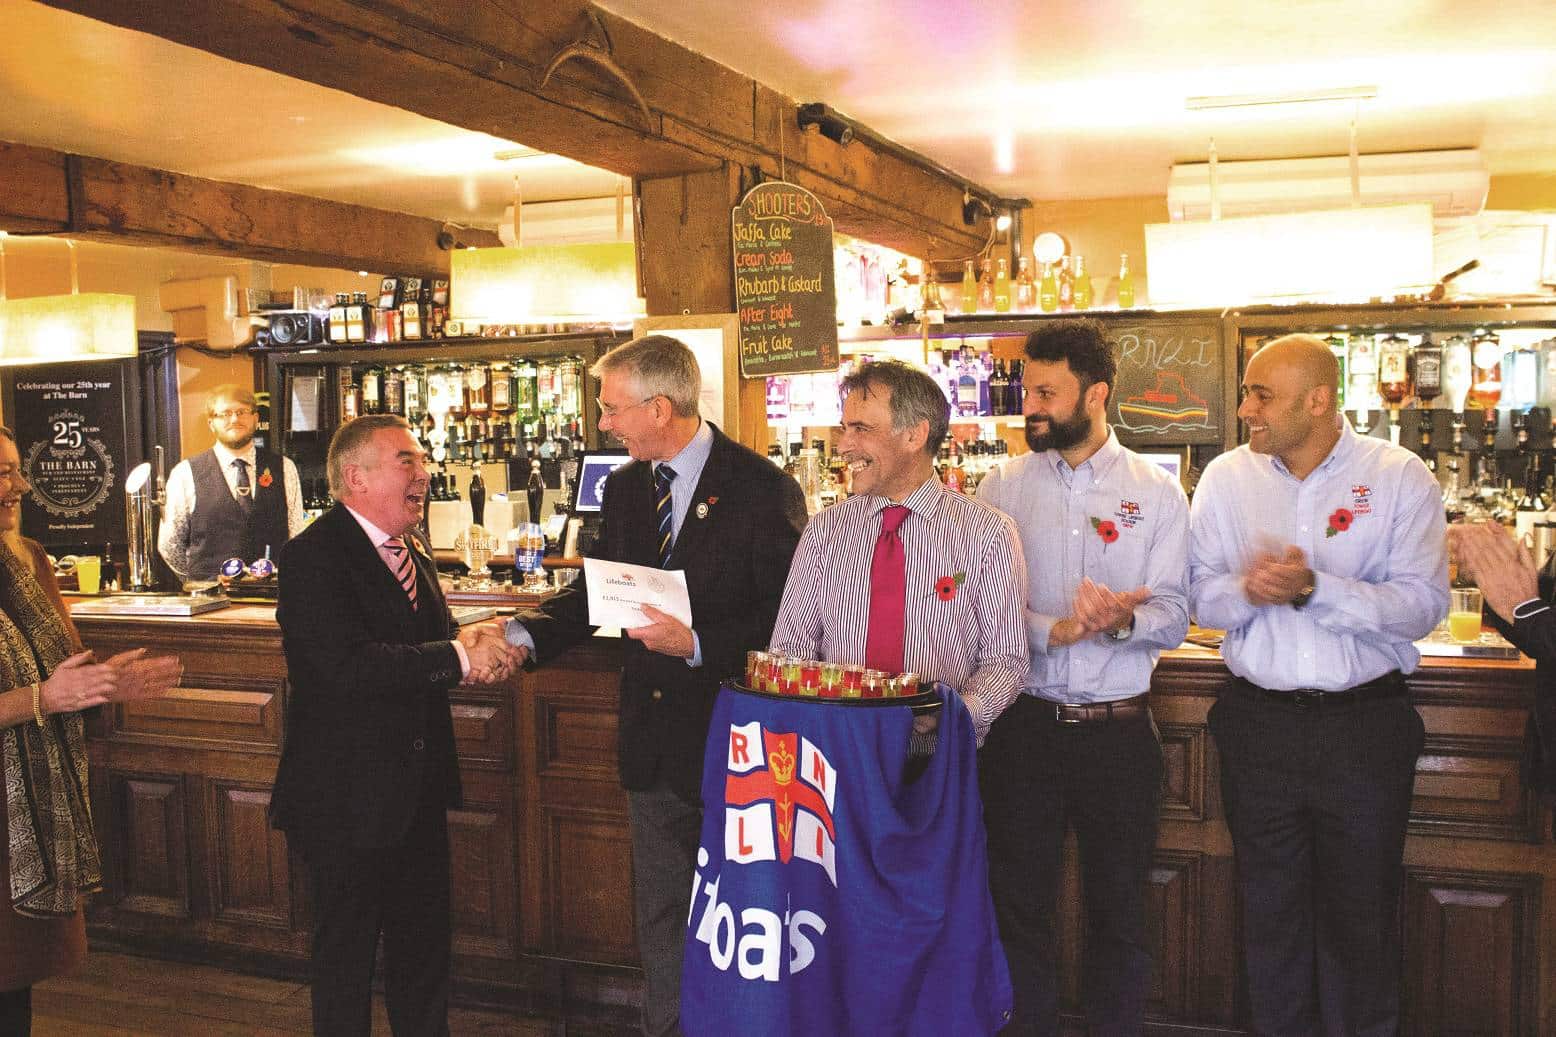 The Barn in Tunbridge Wells celebrates its 25 years by supporting lifeboats charity